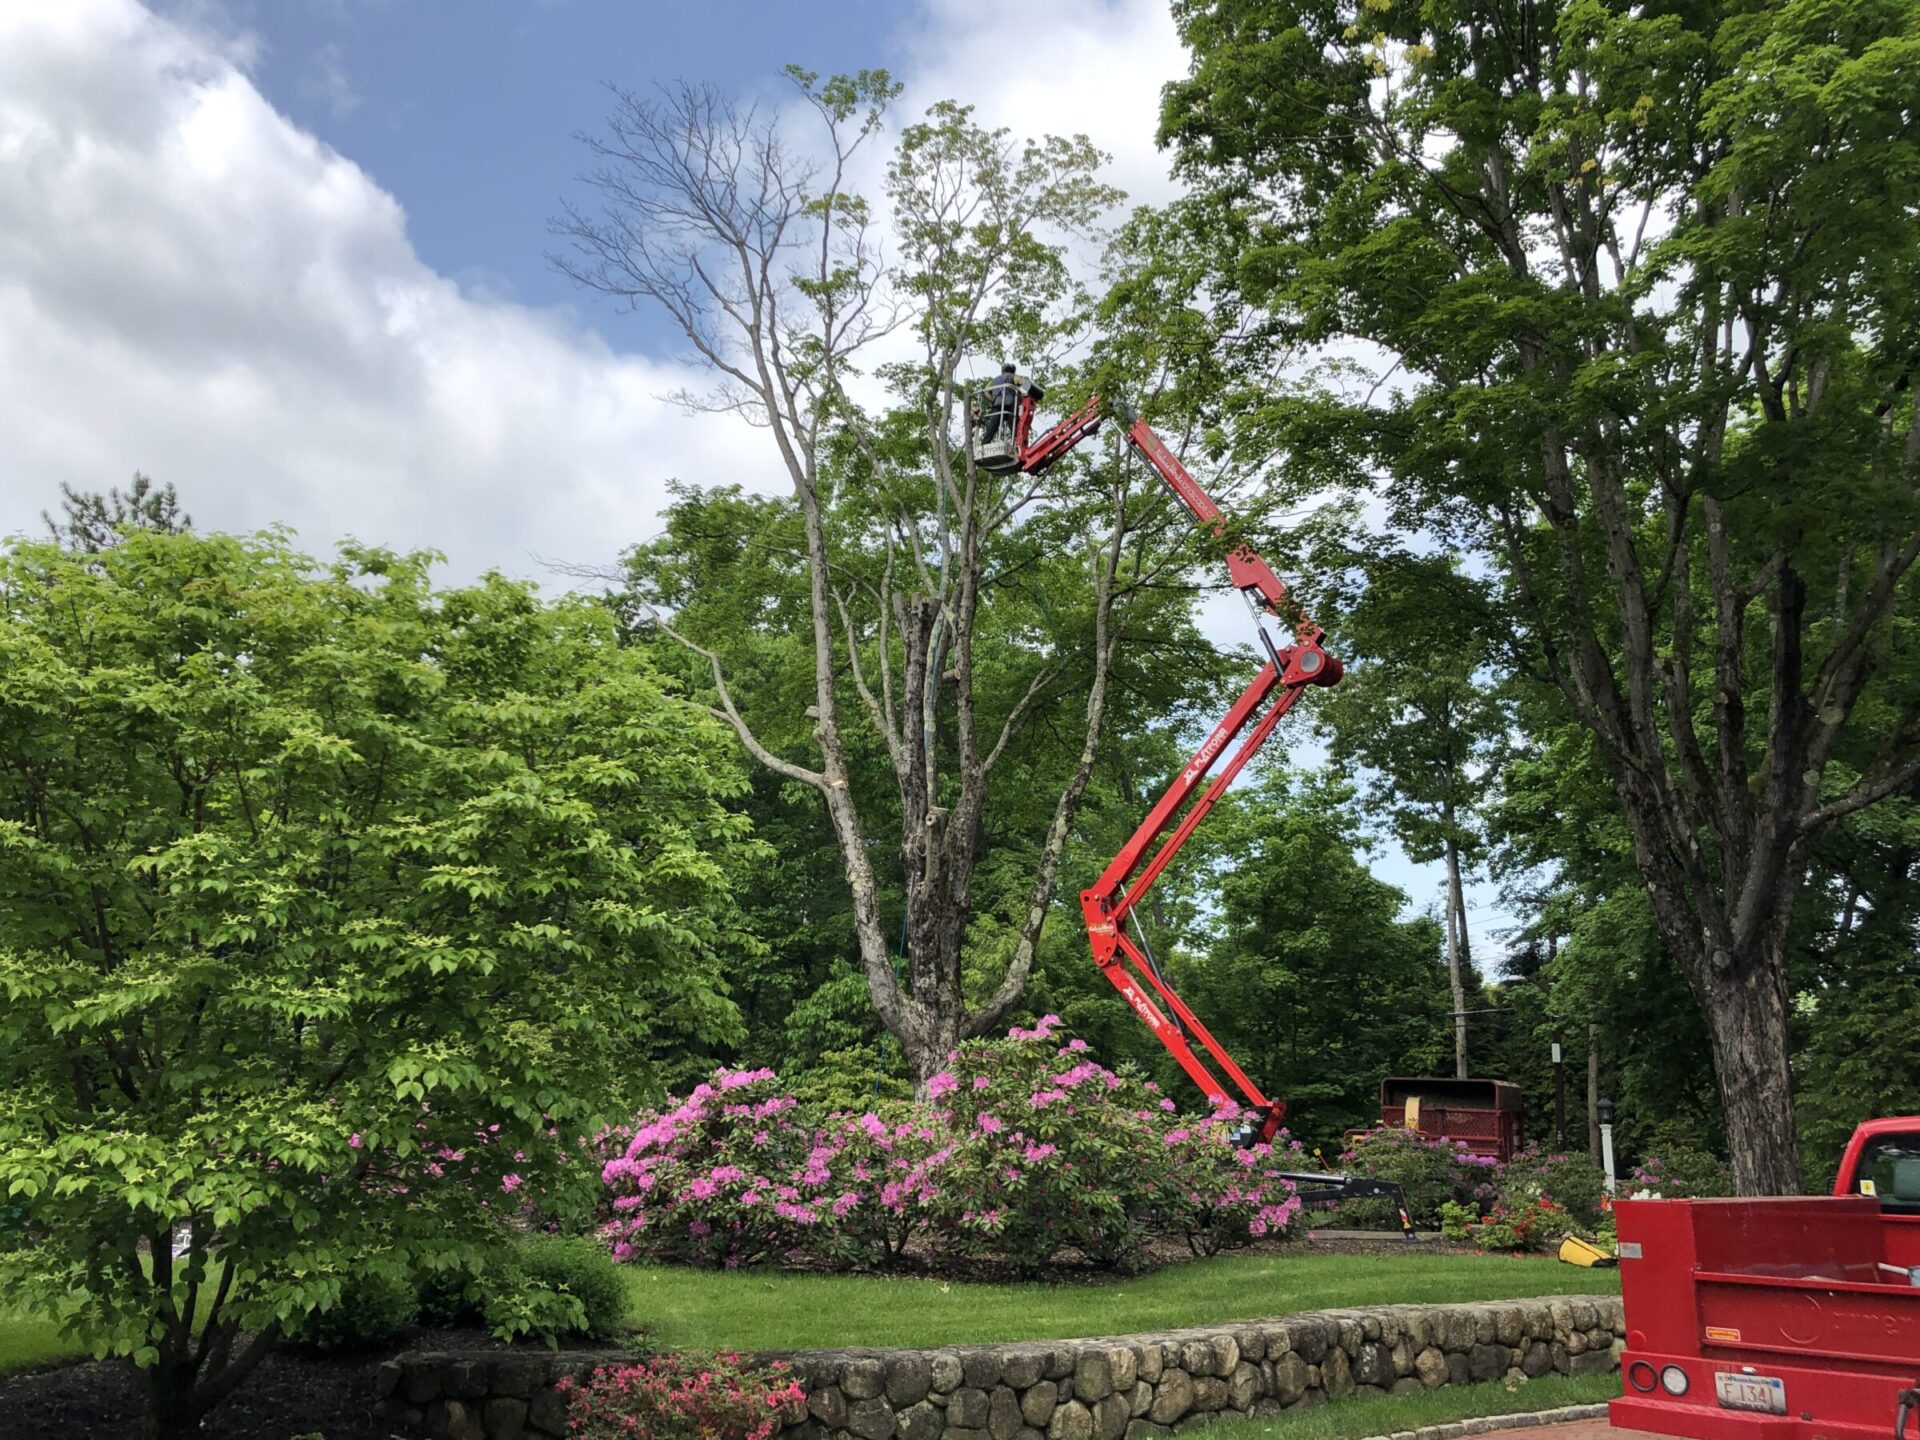 A red articulated boom lift is extended towards a leafless tree among greenery, under a partly cloudy sky. There are flowering shrubs and a stone wall.